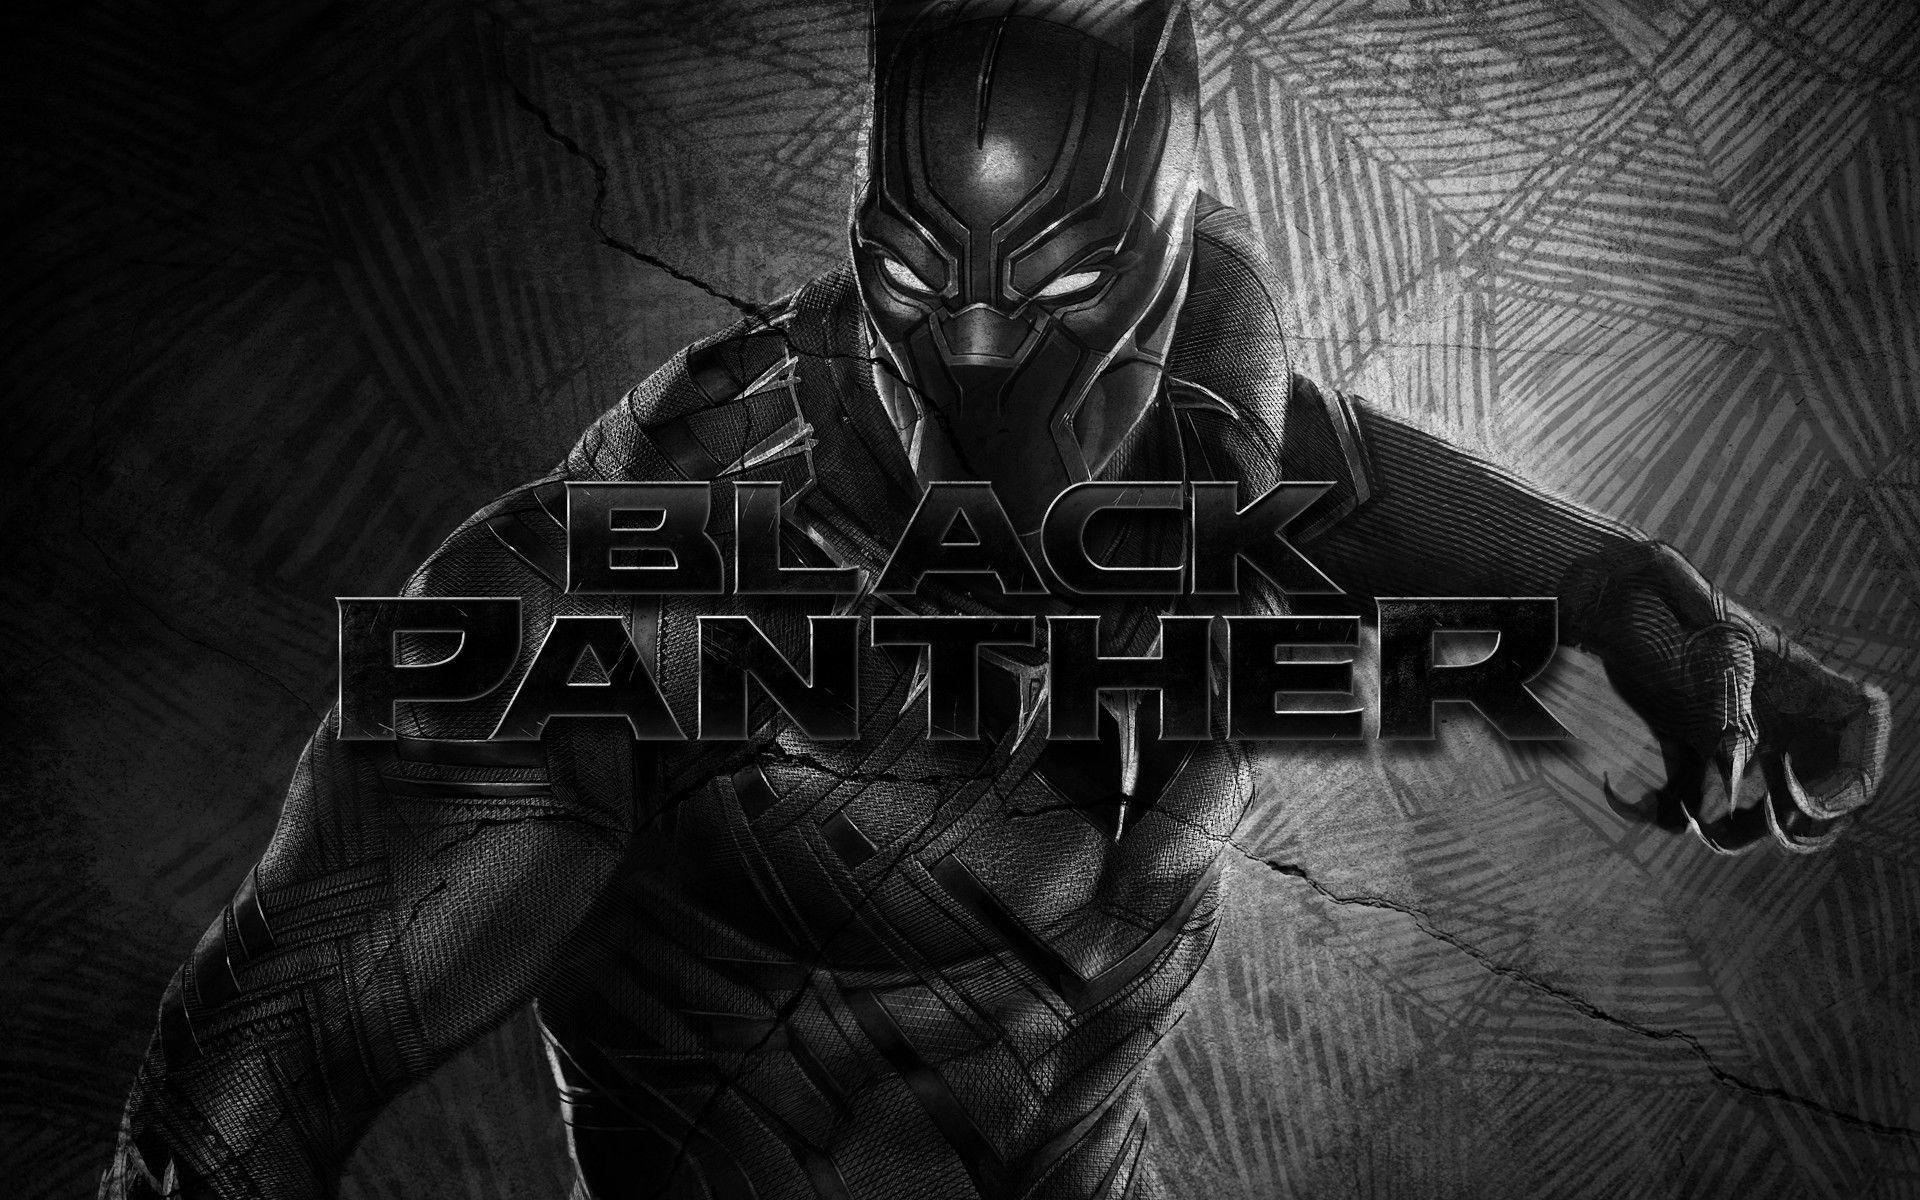 Collection of Black Panther Marvel Wallpapers on HDWallpapers